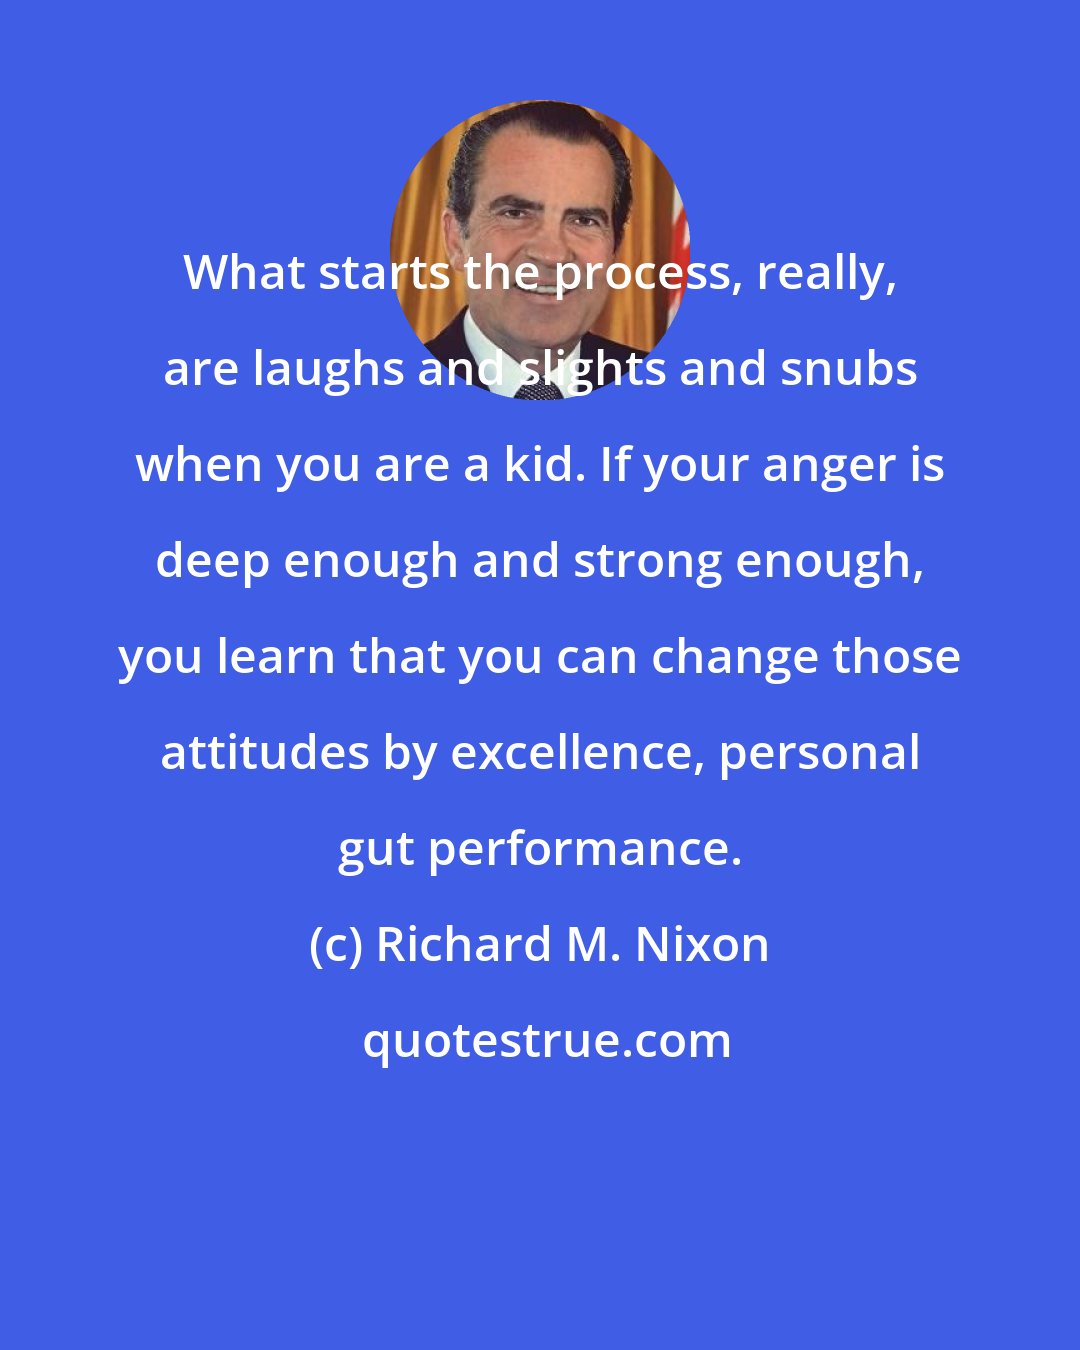 Richard M. Nixon: What starts the process, really, are laughs and slights and snubs when you are a kid. If your anger is deep enough and strong enough, you learn that you can change those attitudes by excellence, personal gut performance.